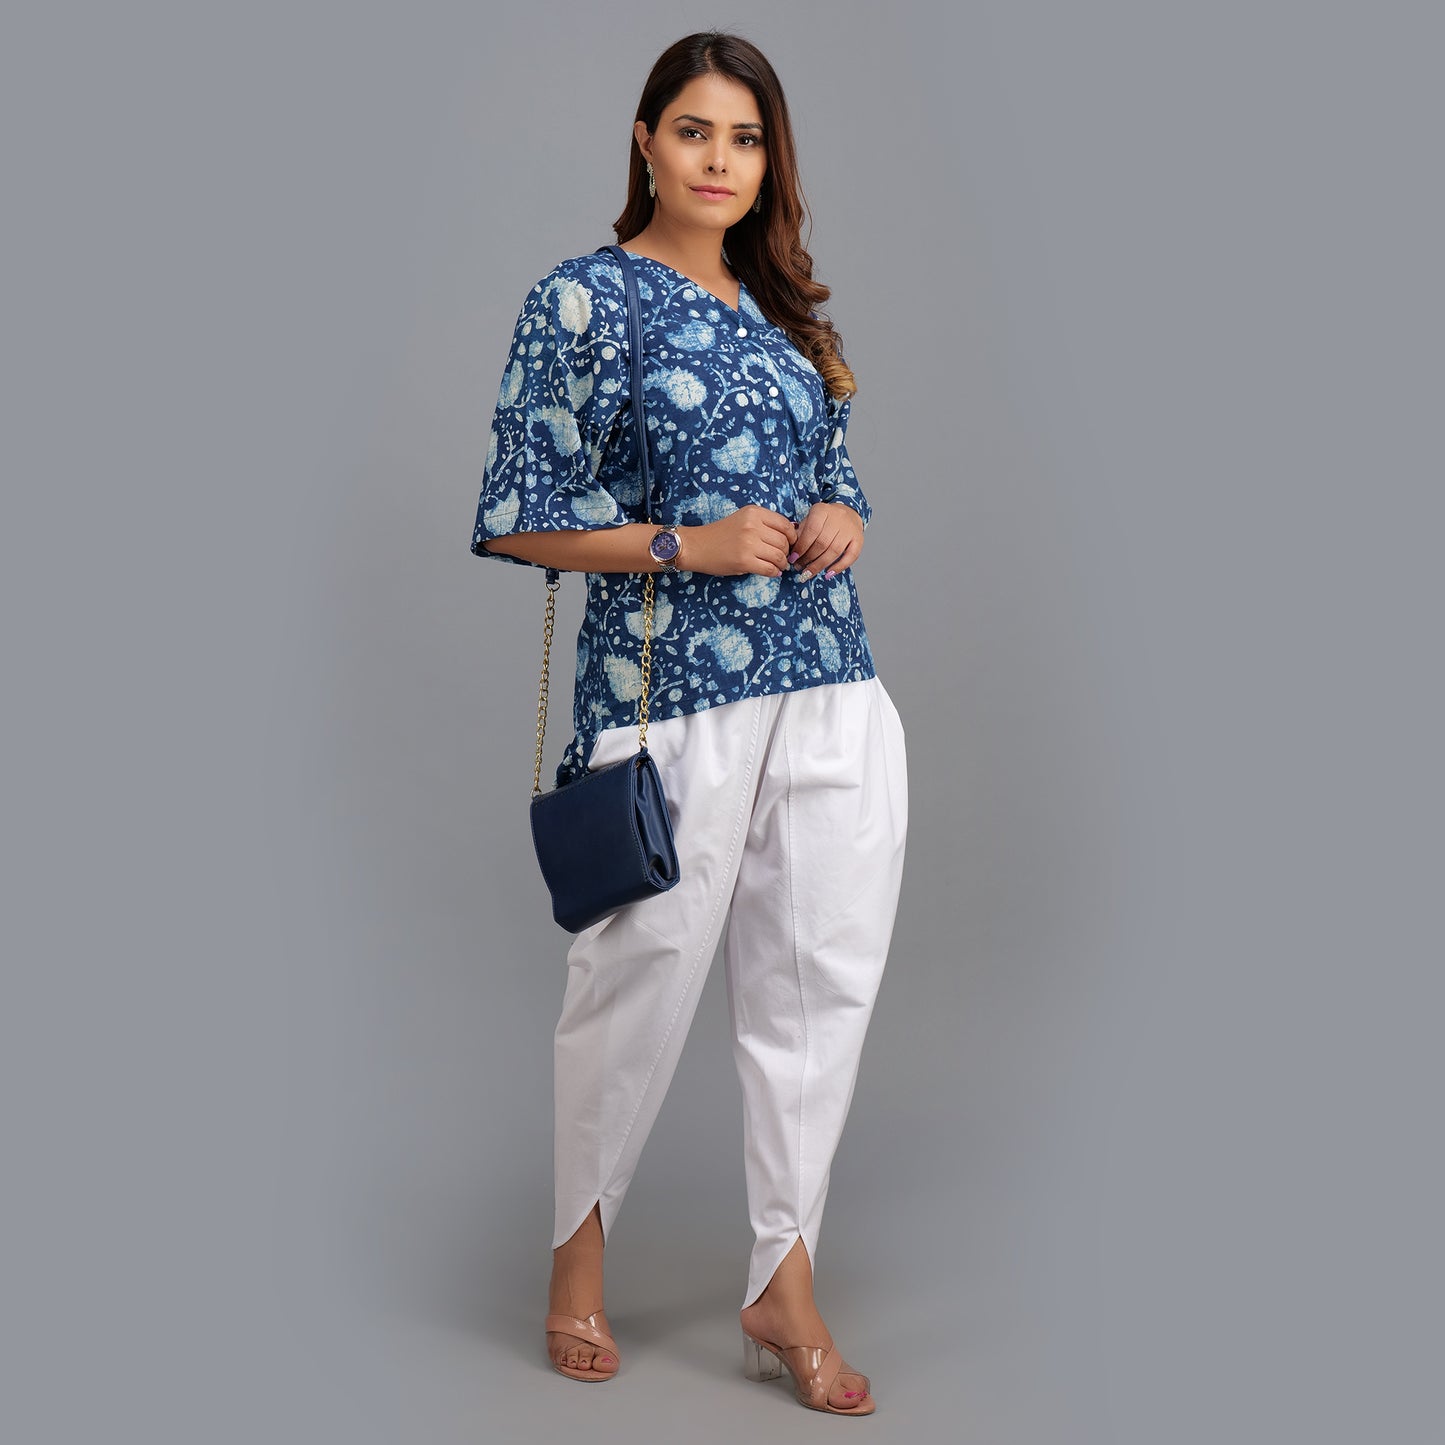 Blue Printed Cotton Top for Women